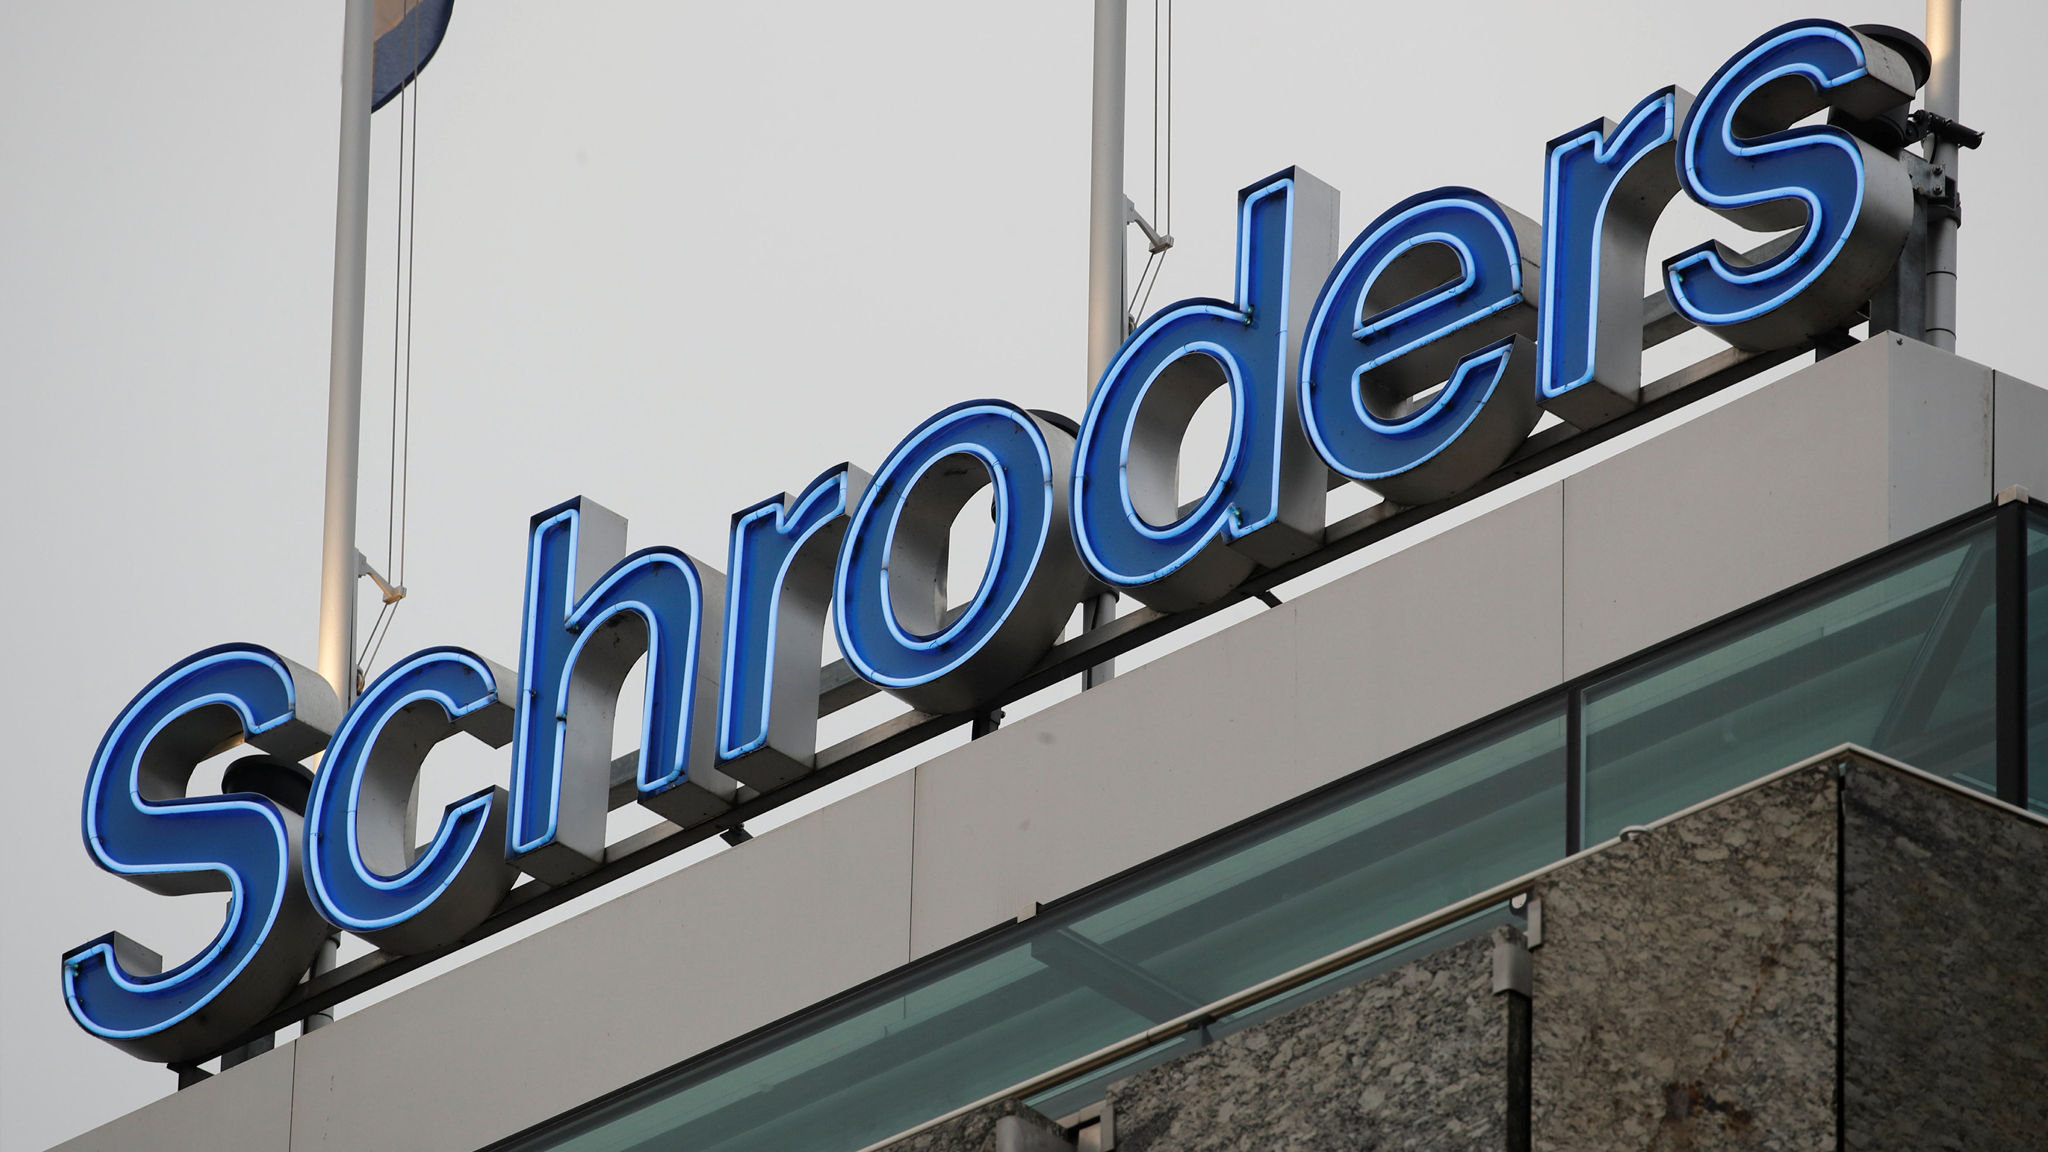 logo-of-investment-management-company-schroders-is-seen-in-zurich